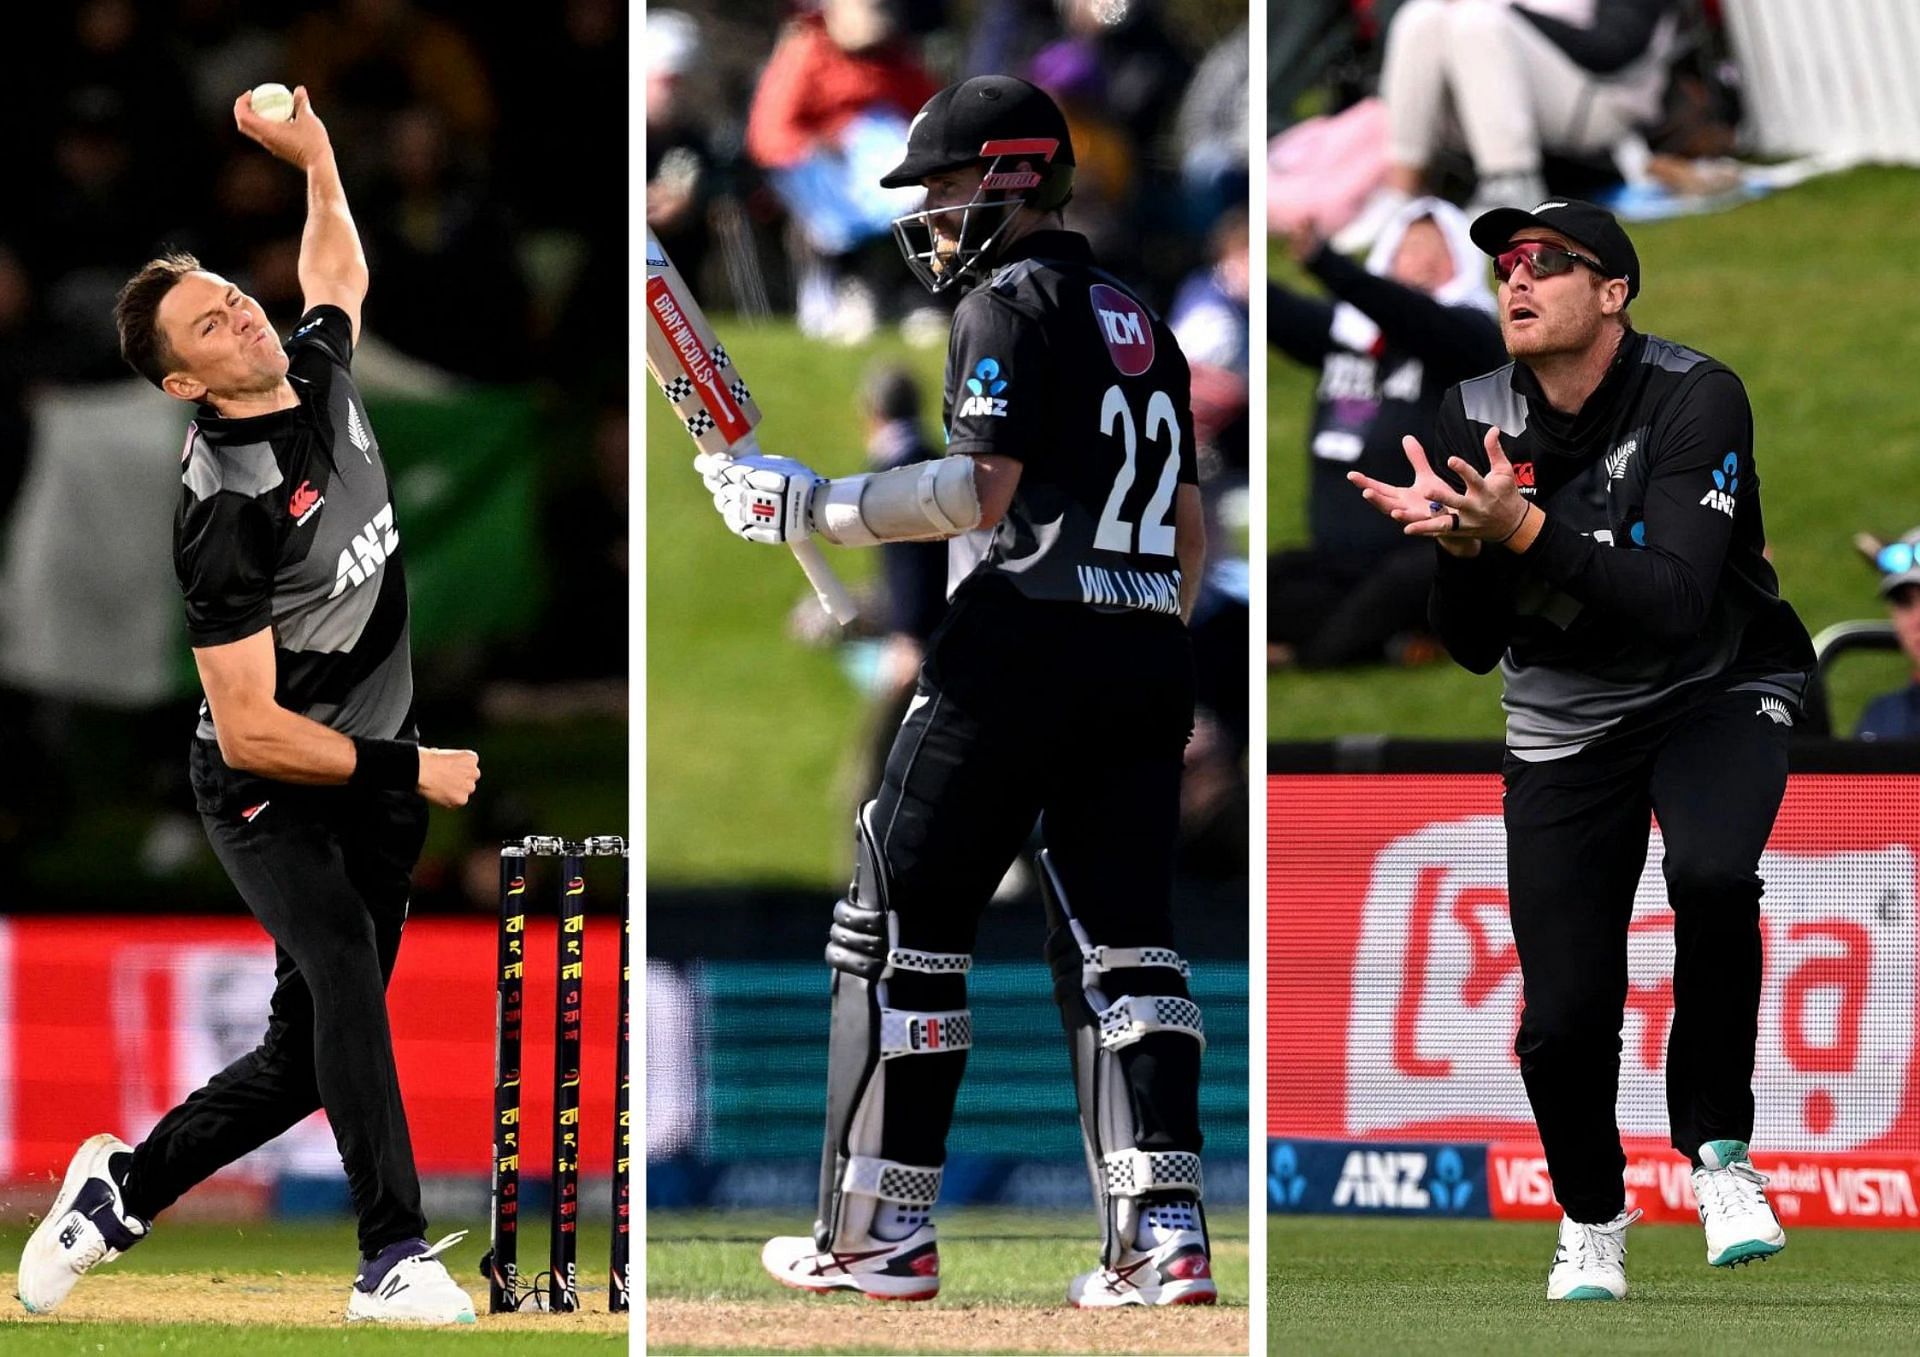 New Zealand were the runners-up at the T20 World Cup last year.